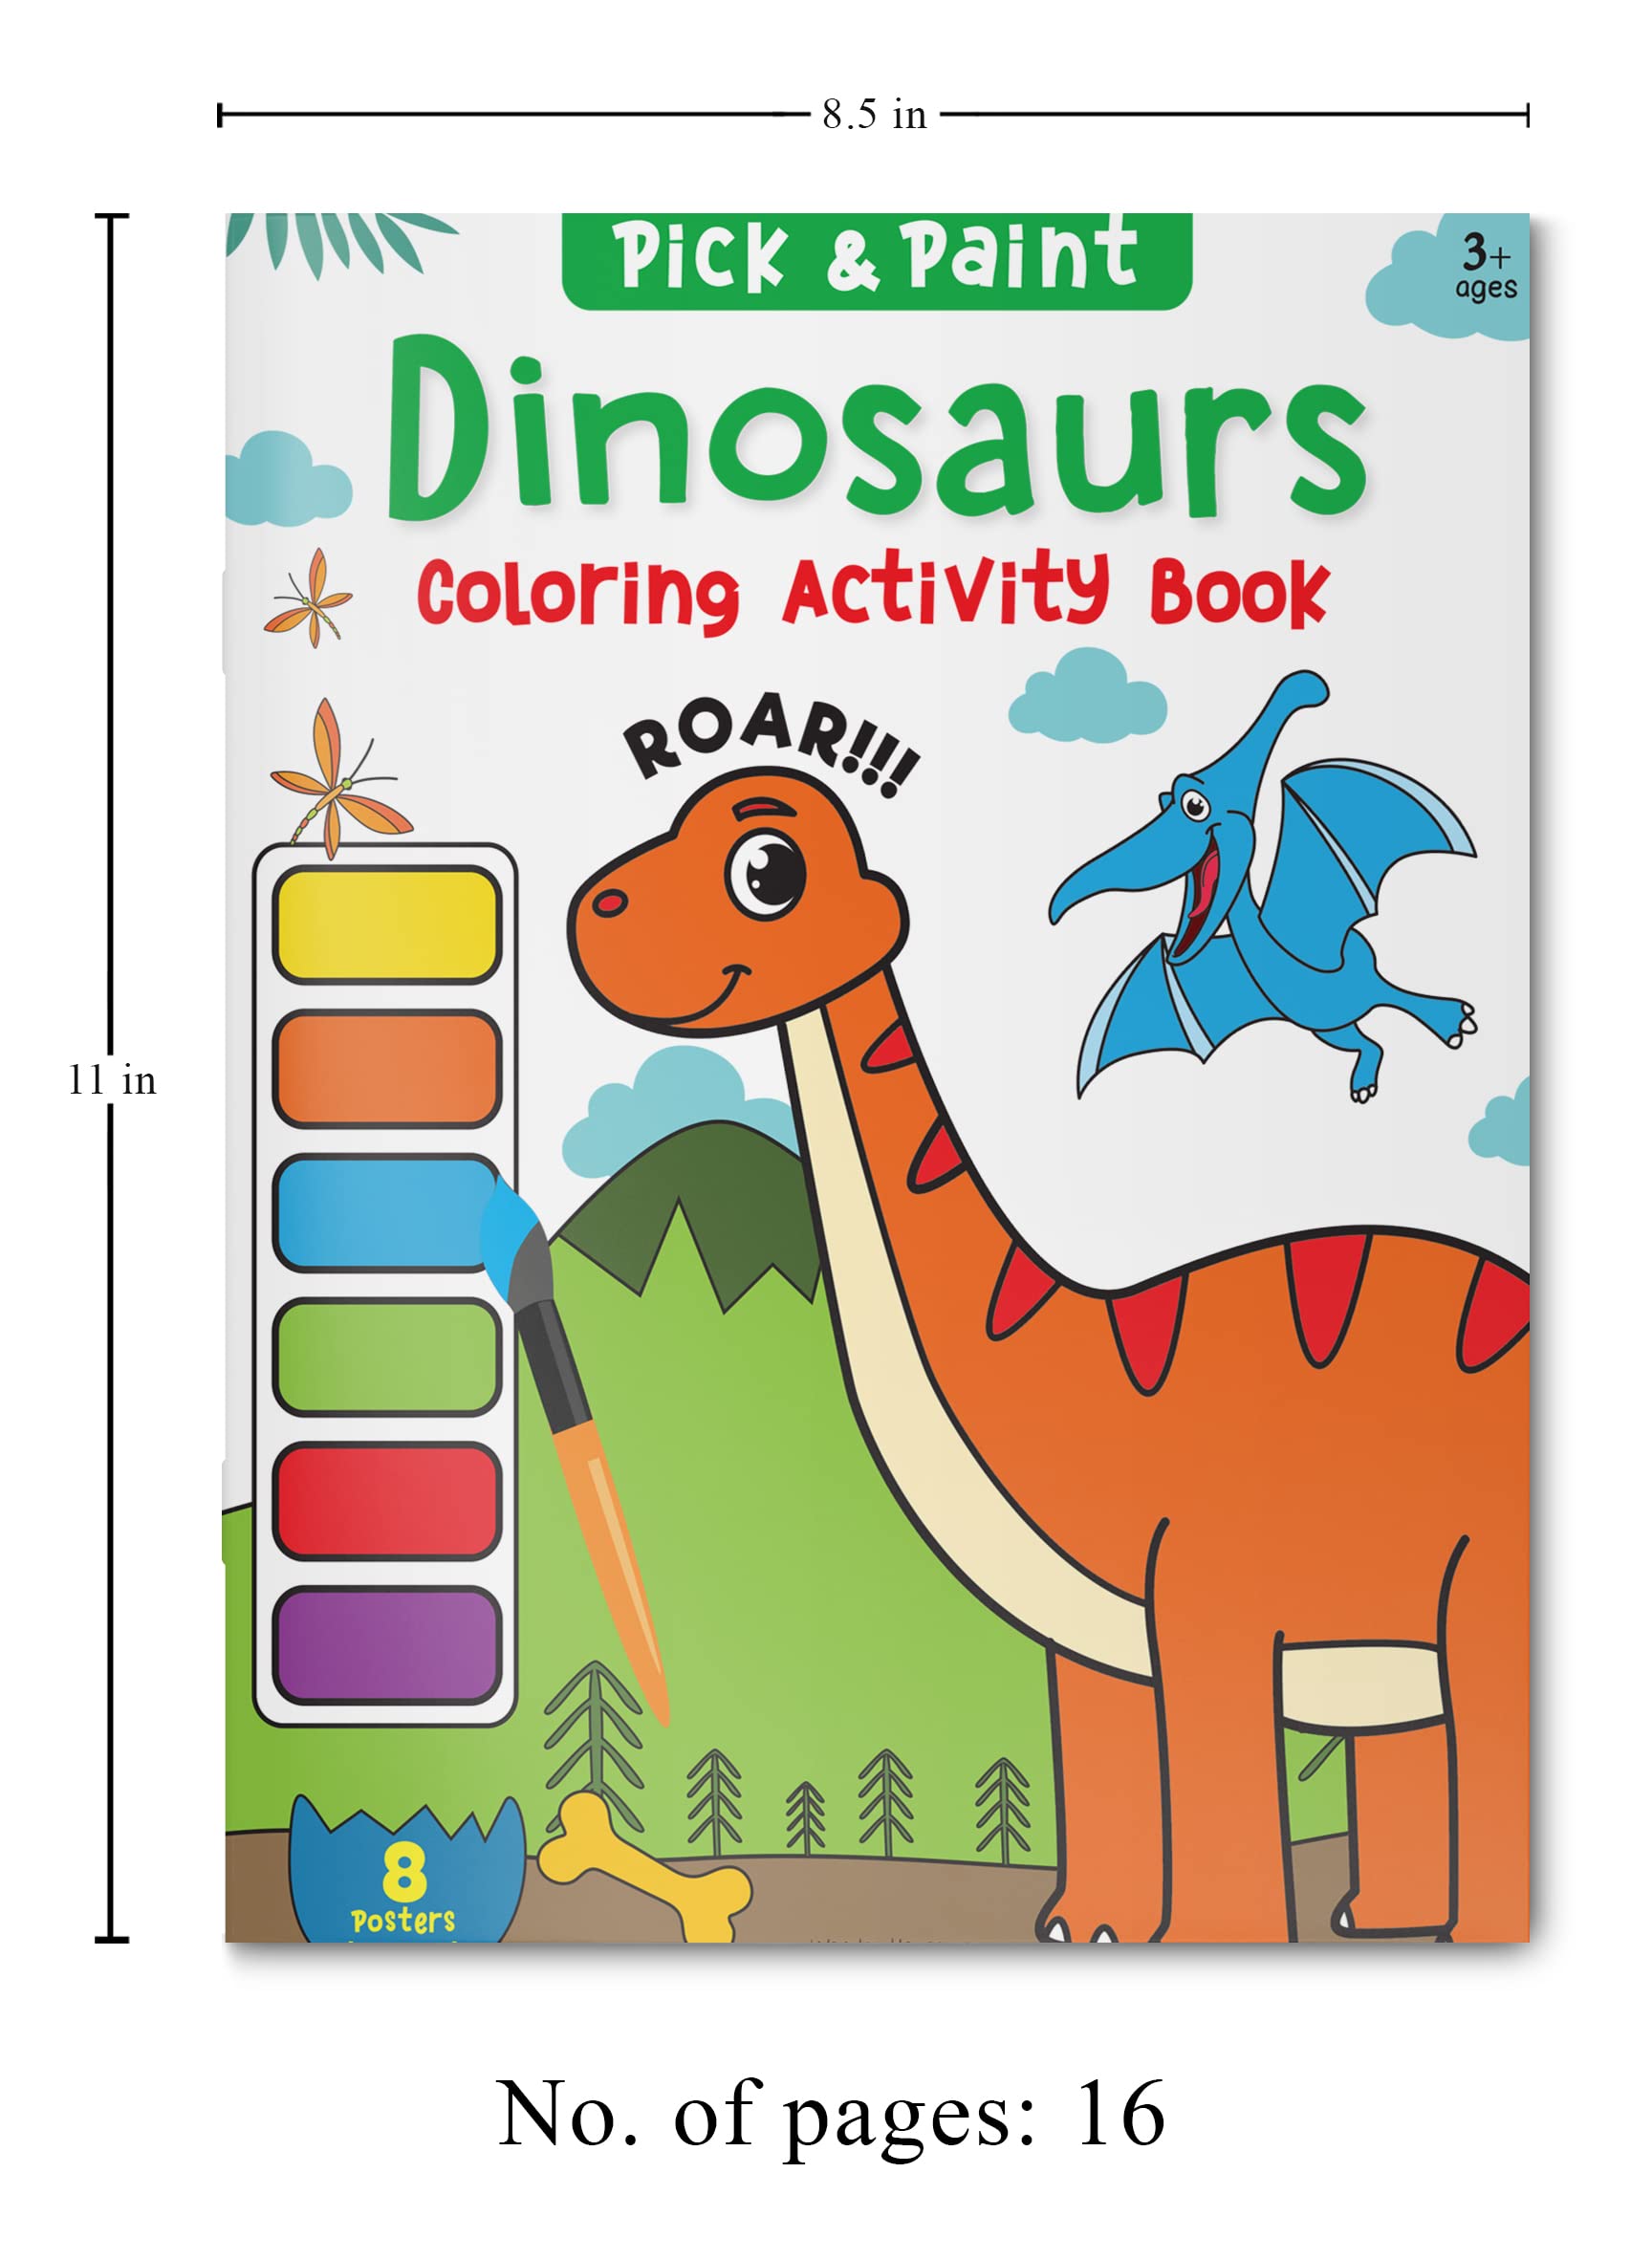 Dinosaurs: Pick & Paint Coloring Activity Book For Kids